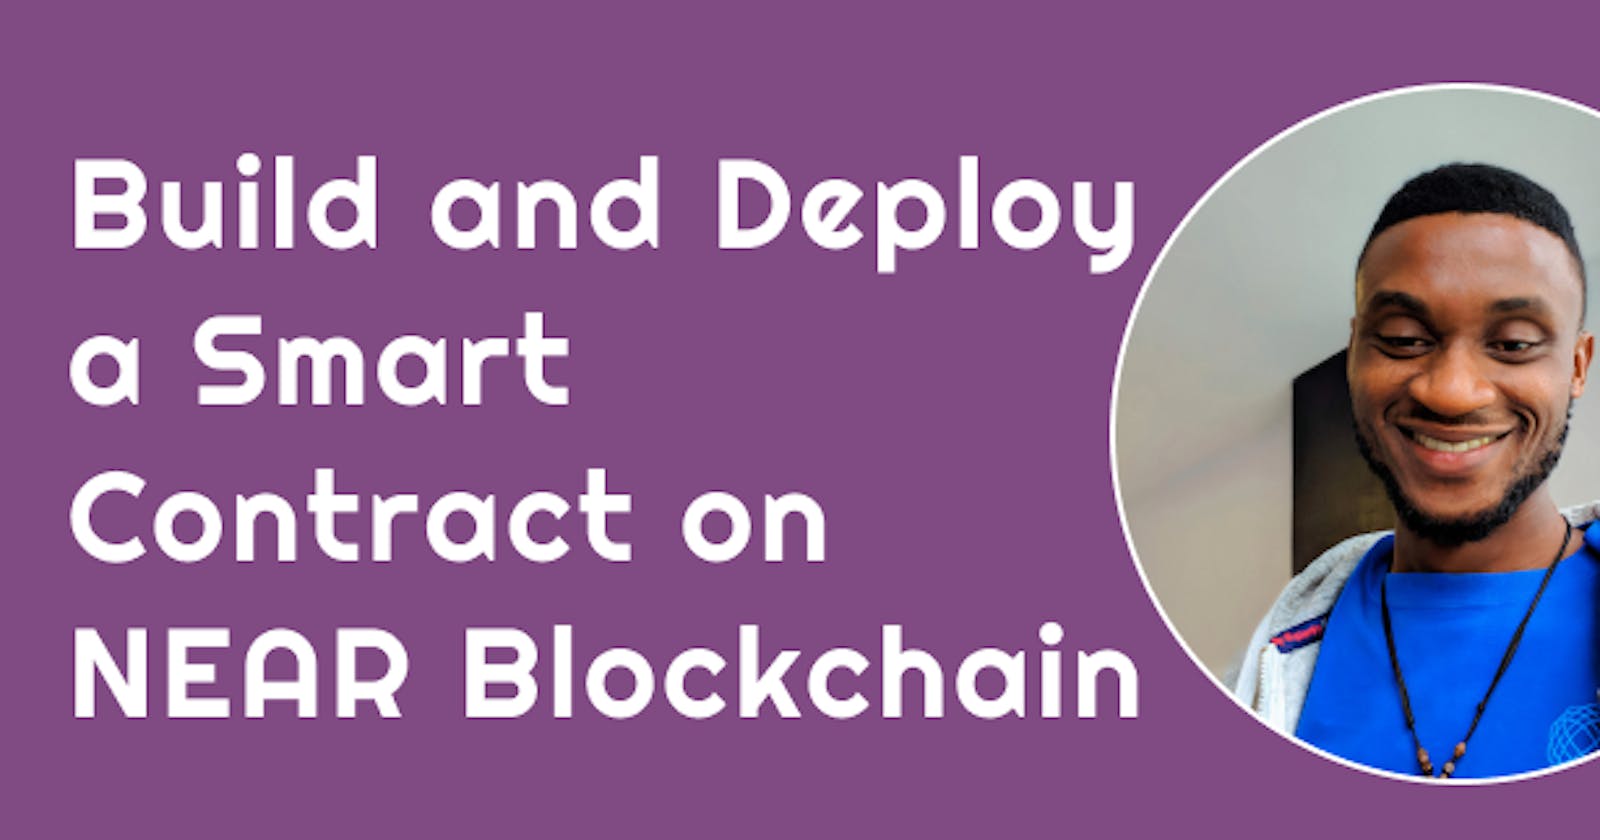 Build and Deploy a Smart Contract on NEAR Blockchain